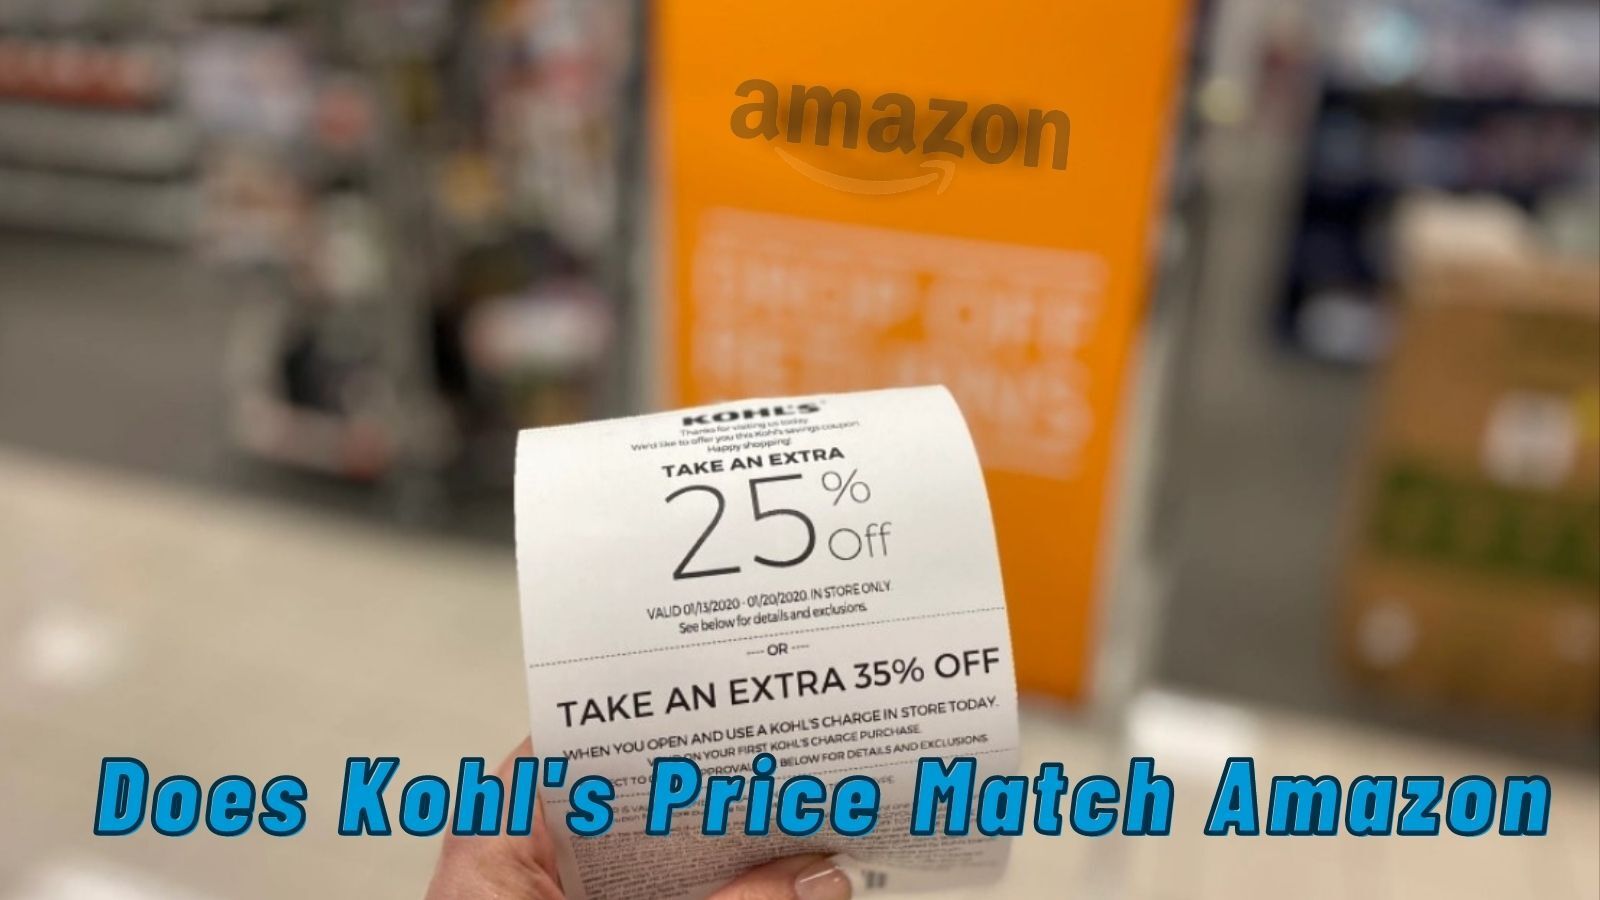 Does Kohl's Price Match Amazon? (A Full Guide)